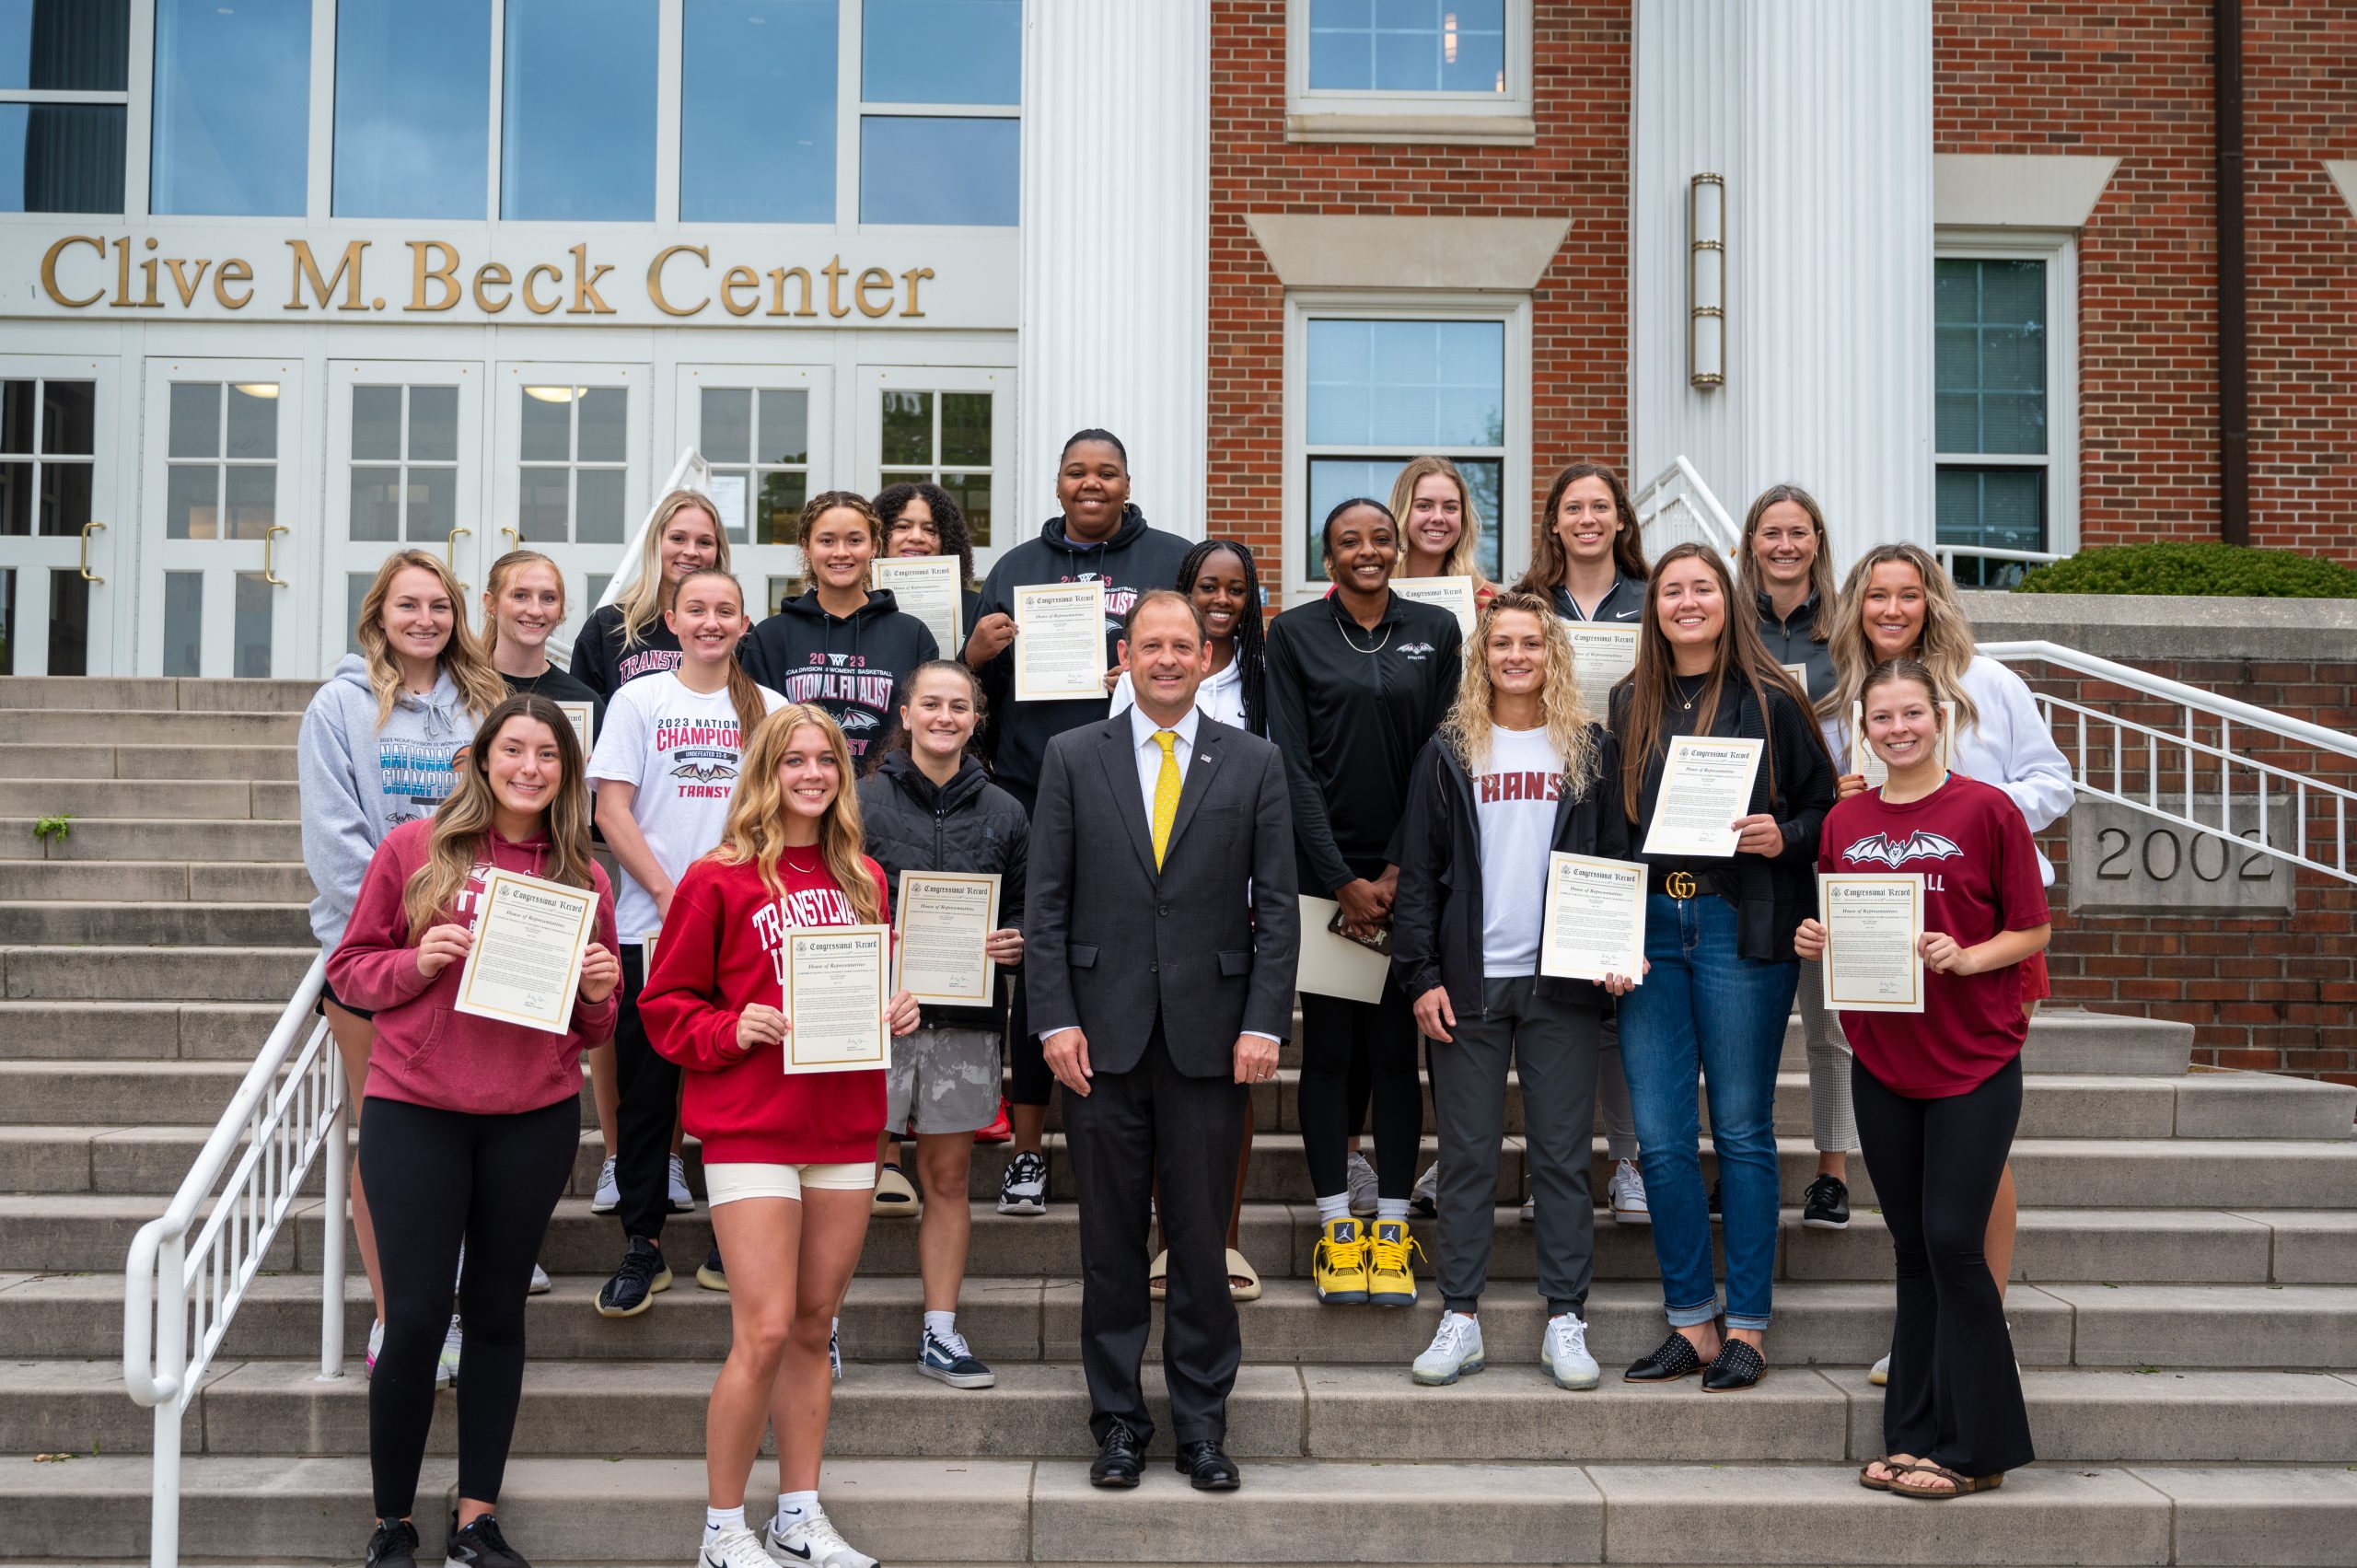 U.S. Rep. Andy Barr stopped by Transylvania’s campus Monday morning to honor the 2023 national champion Pioneers for their undefeated season and NCAA DIII win.